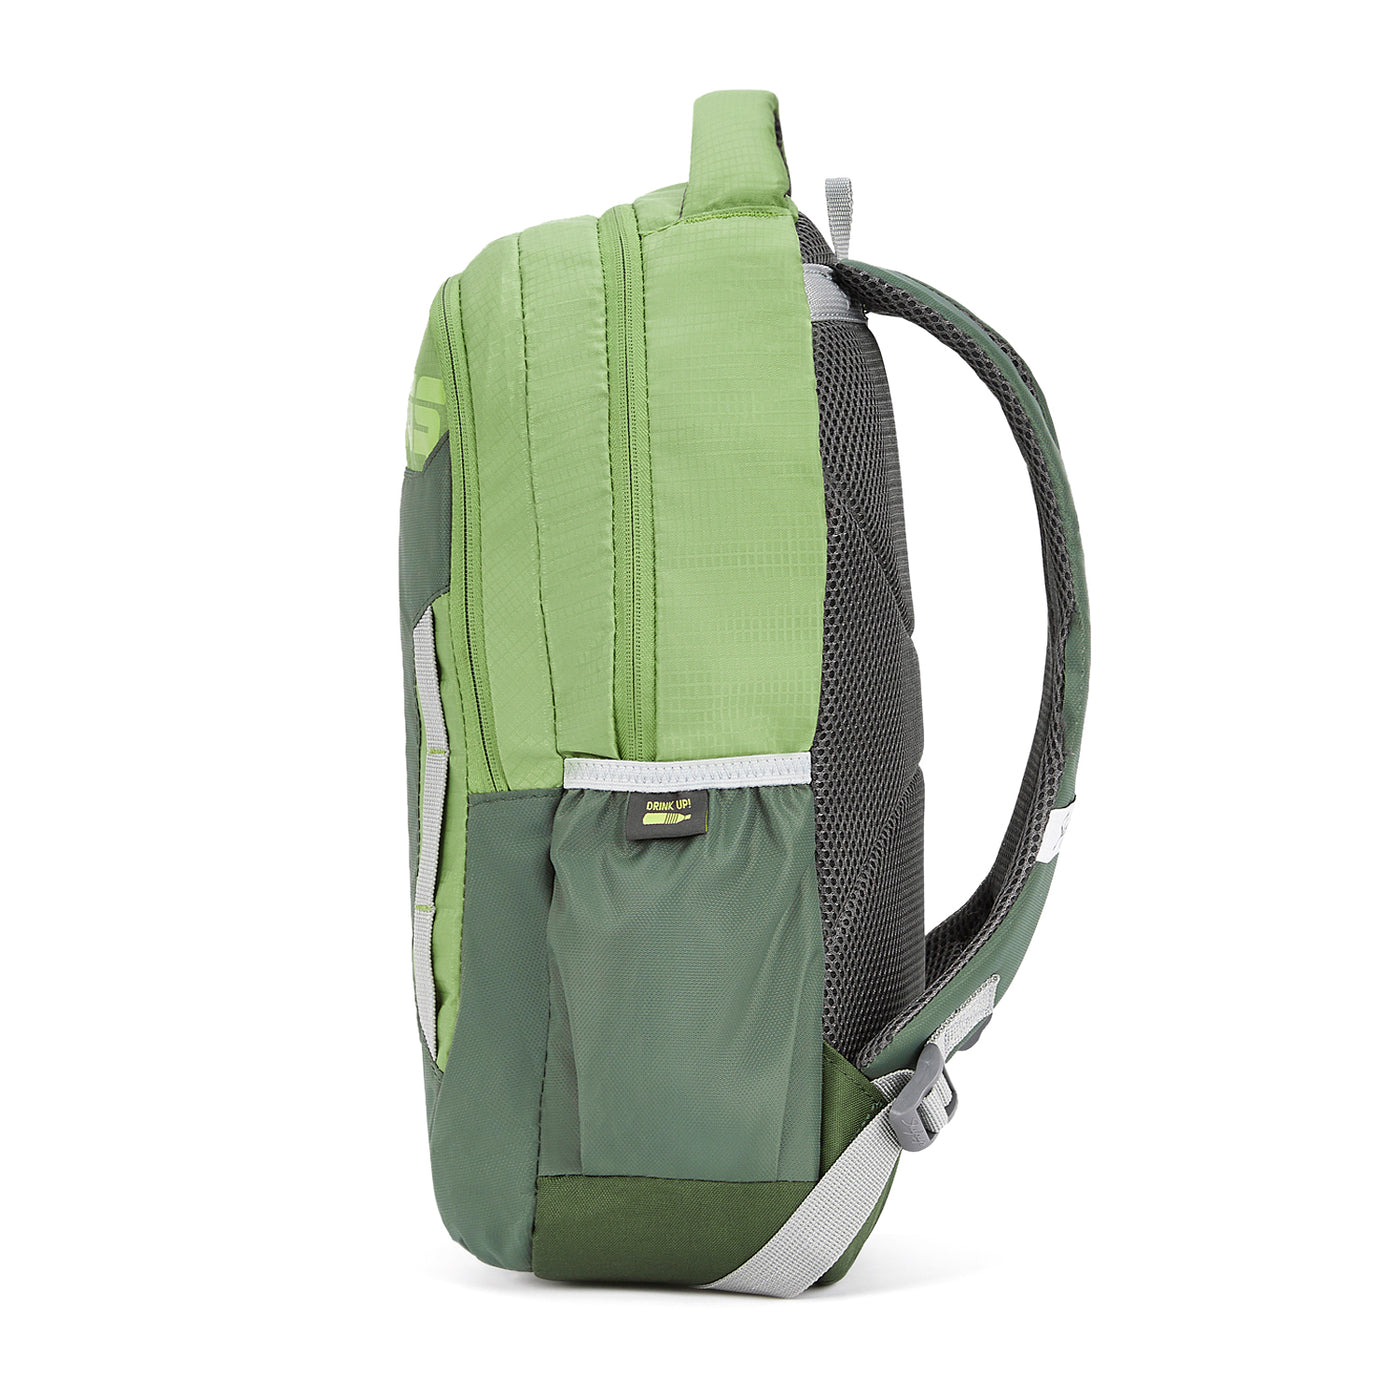 Skybags Voxel "22L Backpack"